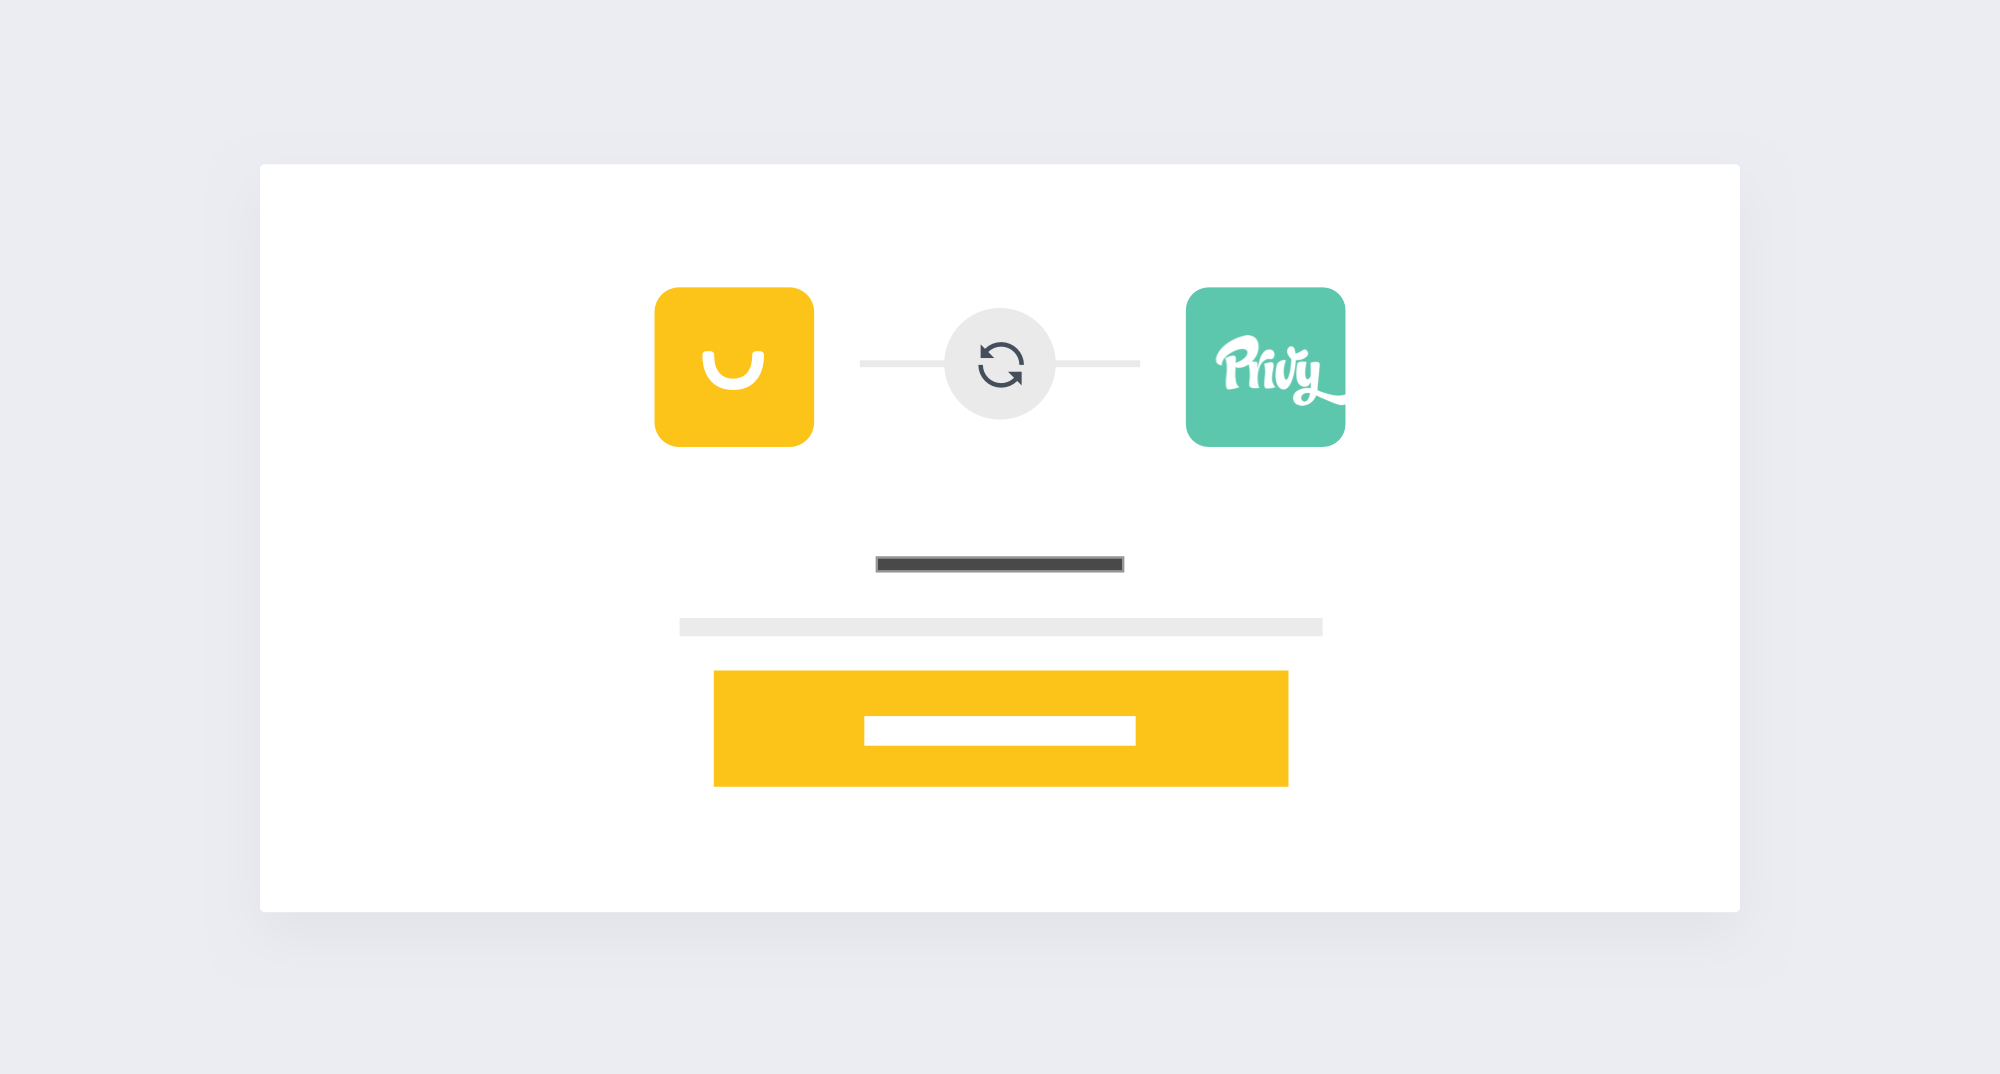 New Smile App Privy - Graphic to sync smile and privy accounts